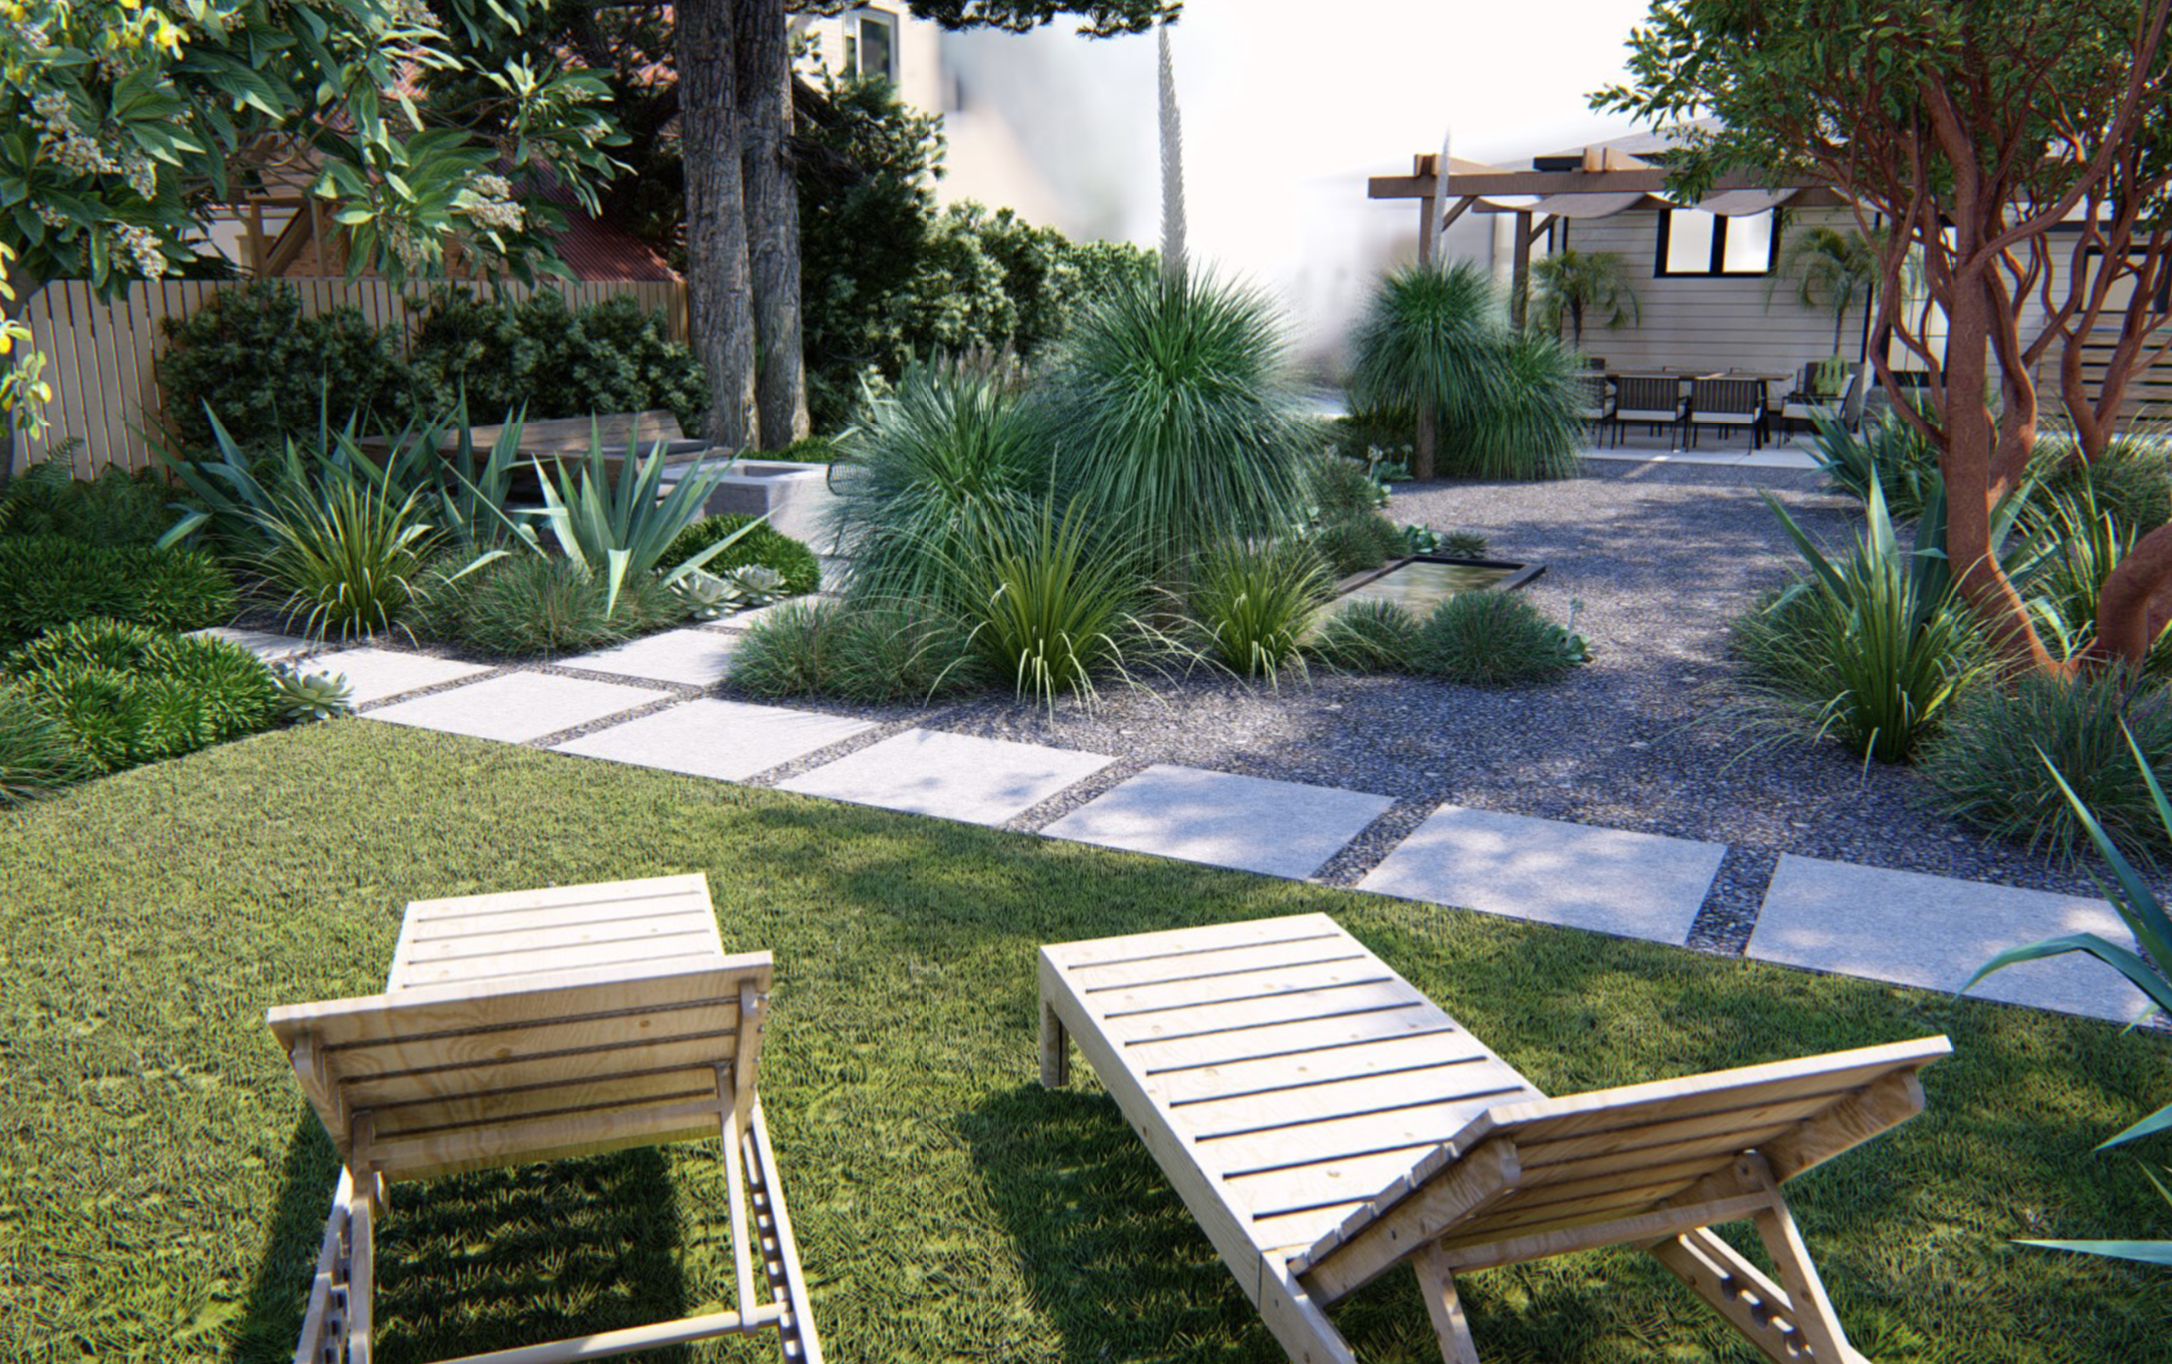 Saletnik and Vesely wanted a synthetic lawn area for their dog, Jasmine, to play. This lawn area is at the back of the property and also makes a good spot for two lounge chairs.